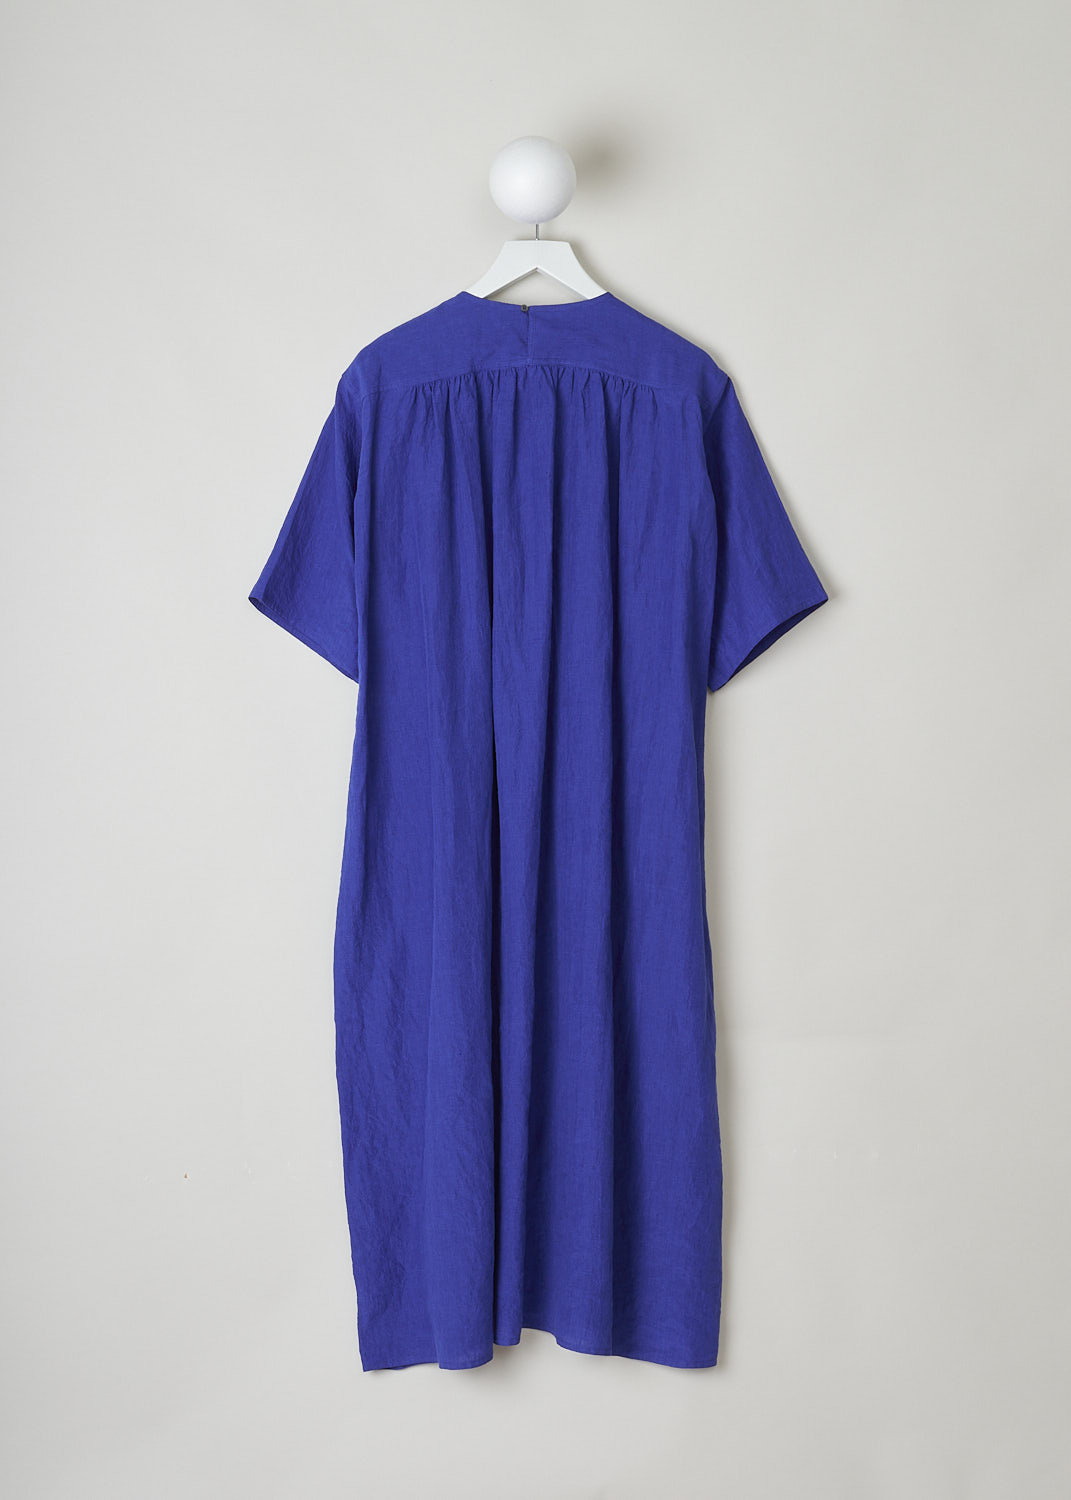 SOFIE D’HOORE, ROYAL BLUE LINEN DARNELLE DRESS, DARNELLE_LIFE_TOUAREG, Blue, Back, This oversized royal blue midi dress features a round neckline, dropped shoulders and short sleeves. The A-line dress has a square bib-like front with pleated details below. Concealed in the side seams, slanted pockets can be found. The dress has a straight hemline with slits on either side. 

